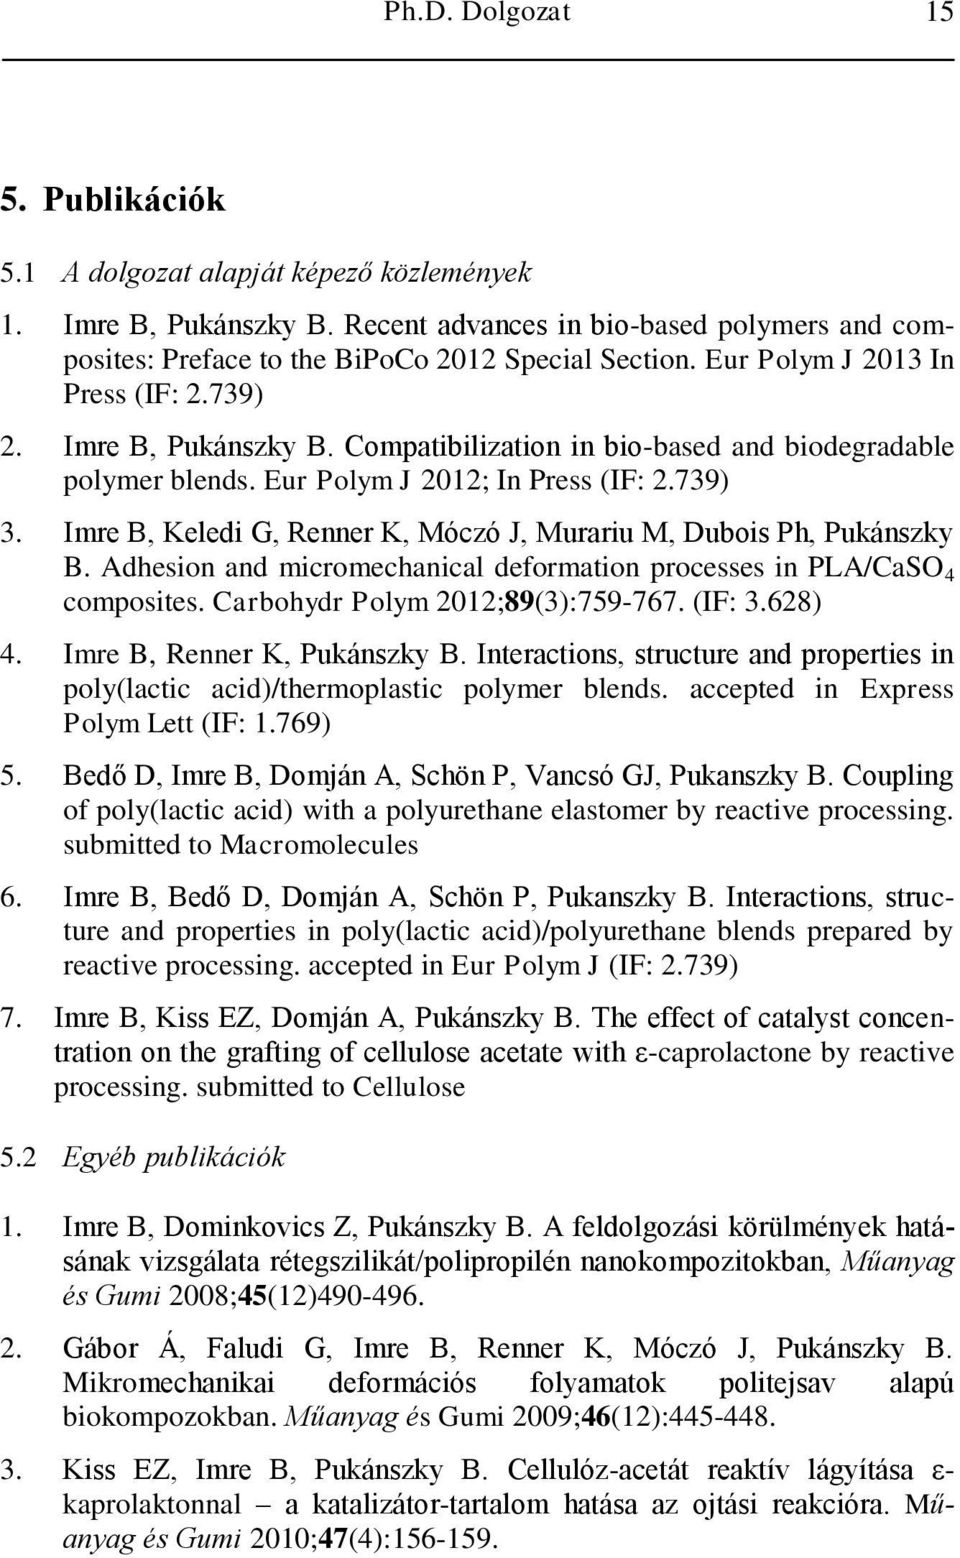 Imre B, Keledi G, Renner K, Móczó J, Murariu M, Dubois Ph, Pukánszky B. Adhesion and micromechanical deformation processes in PLA/CaSO 4 composites. Carbohydr Polym 2012;89(3):759-767. (IF: 3.628) 4.